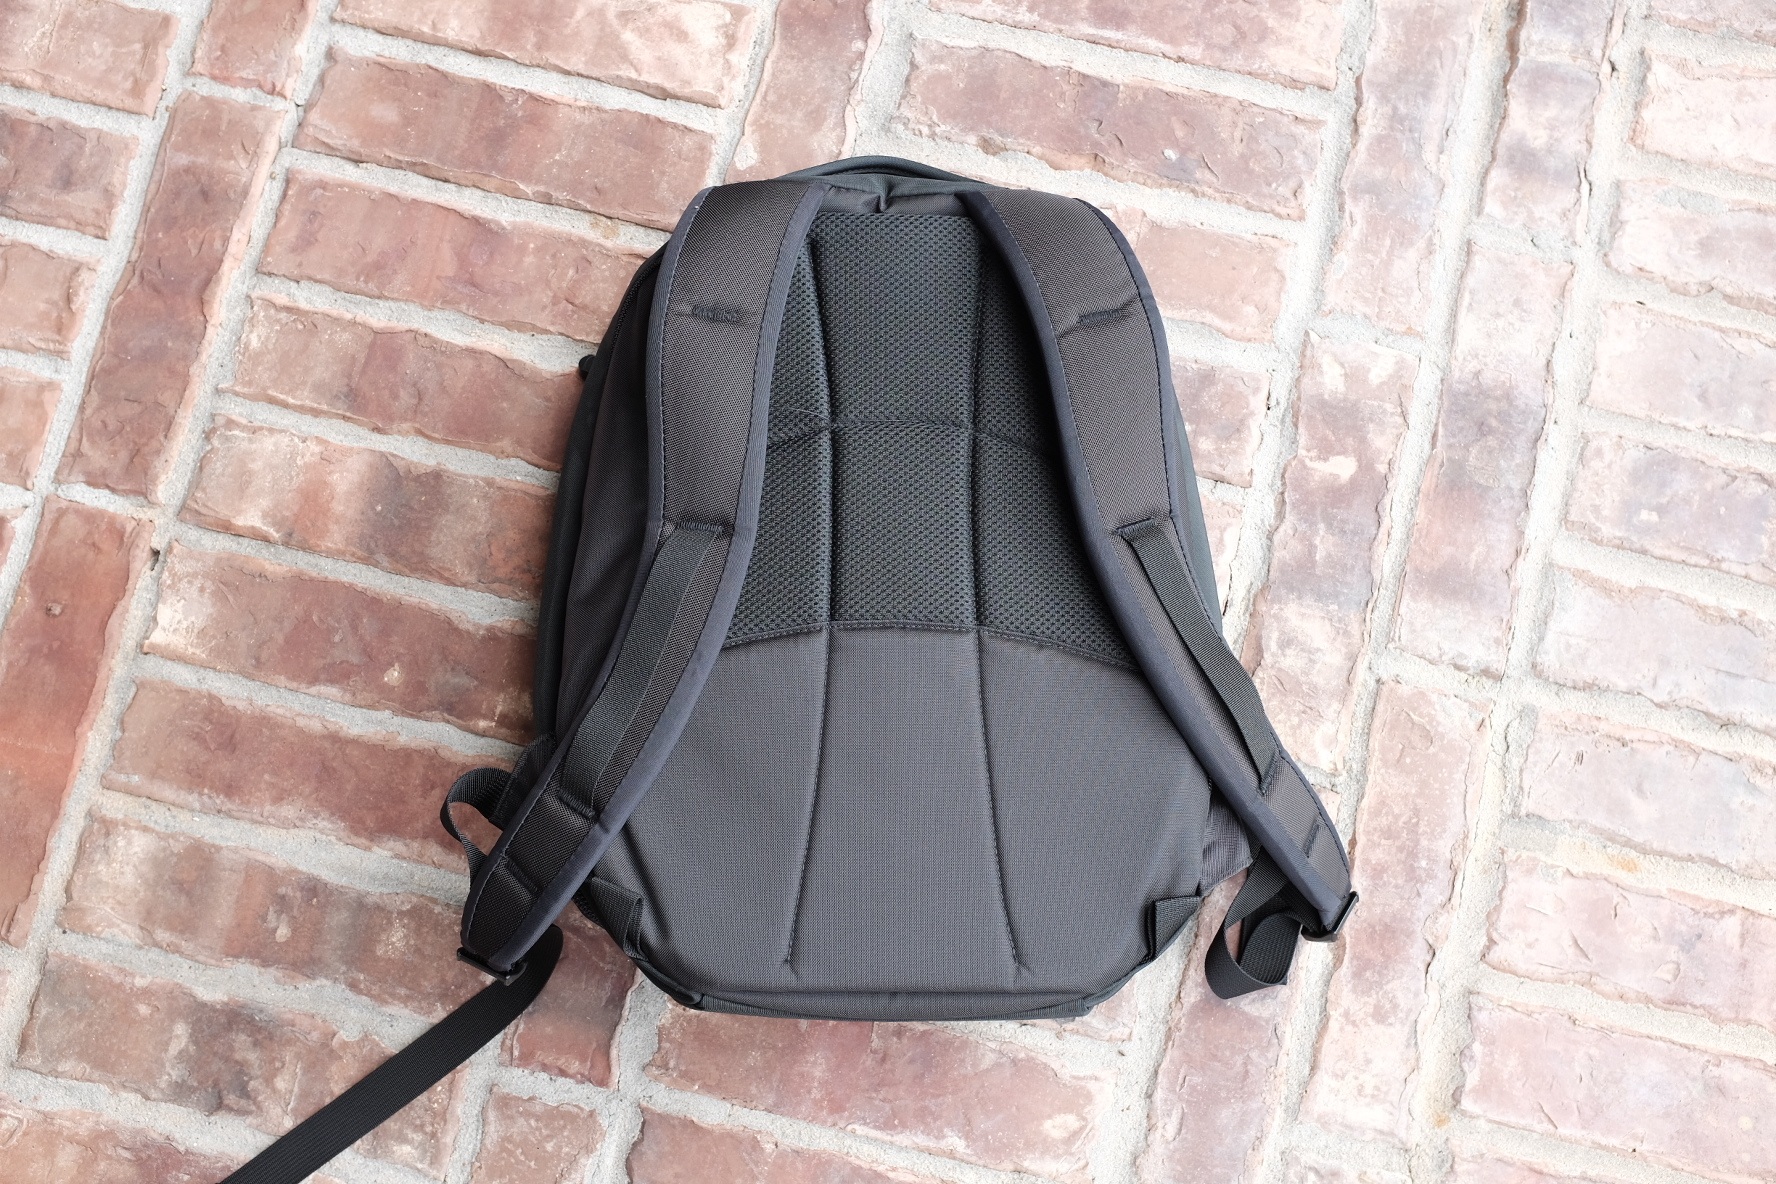 Tom Bihn’s New Synik 22 and 30 – The Brooks Review